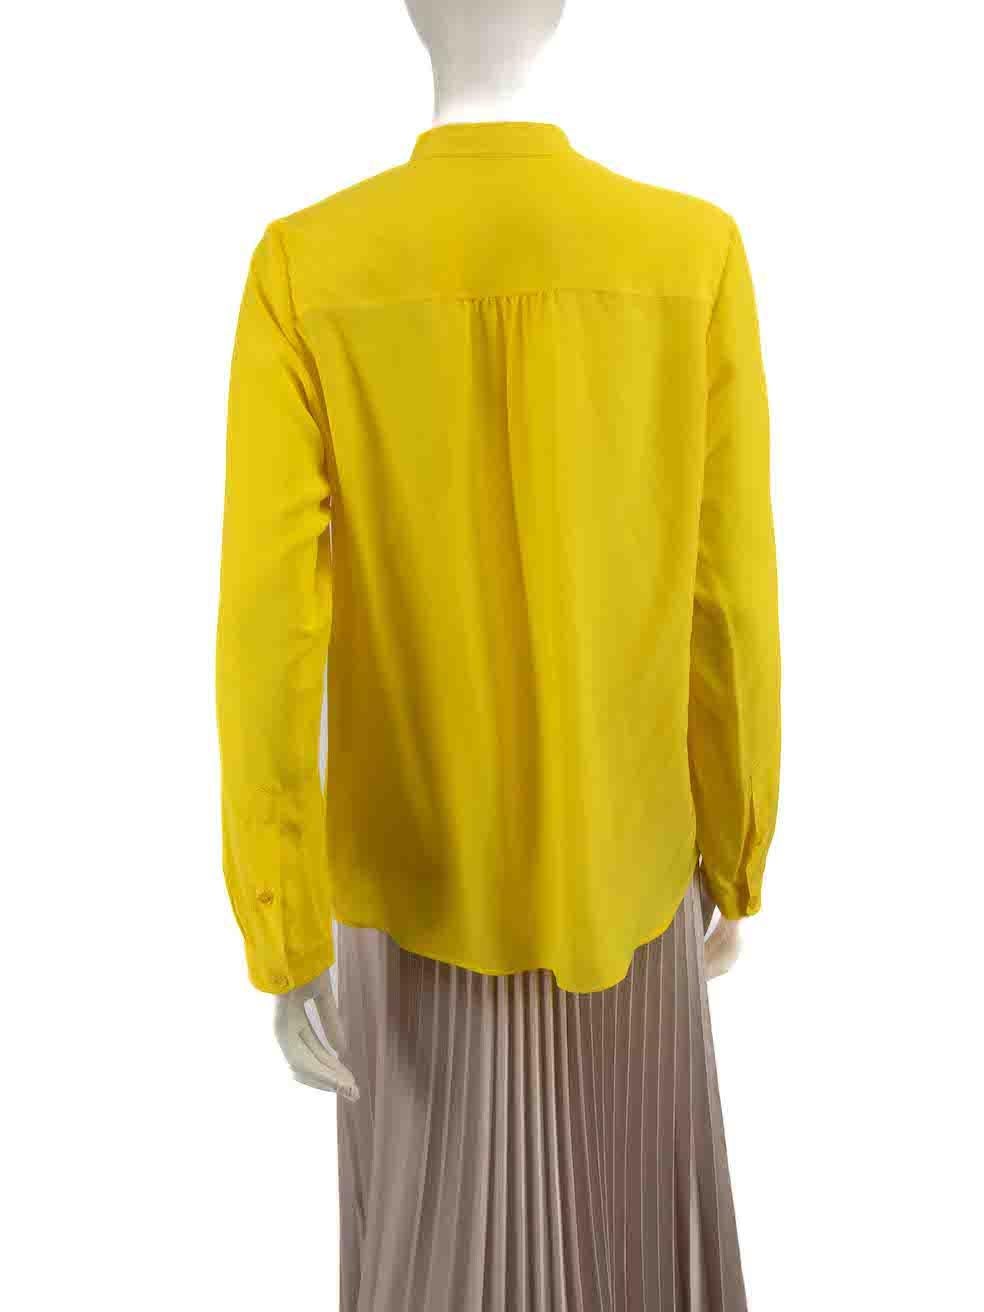 Stella McCartney Yellow Silk Pocket Detail Blouse Size M In Good Condition For Sale In London, GB